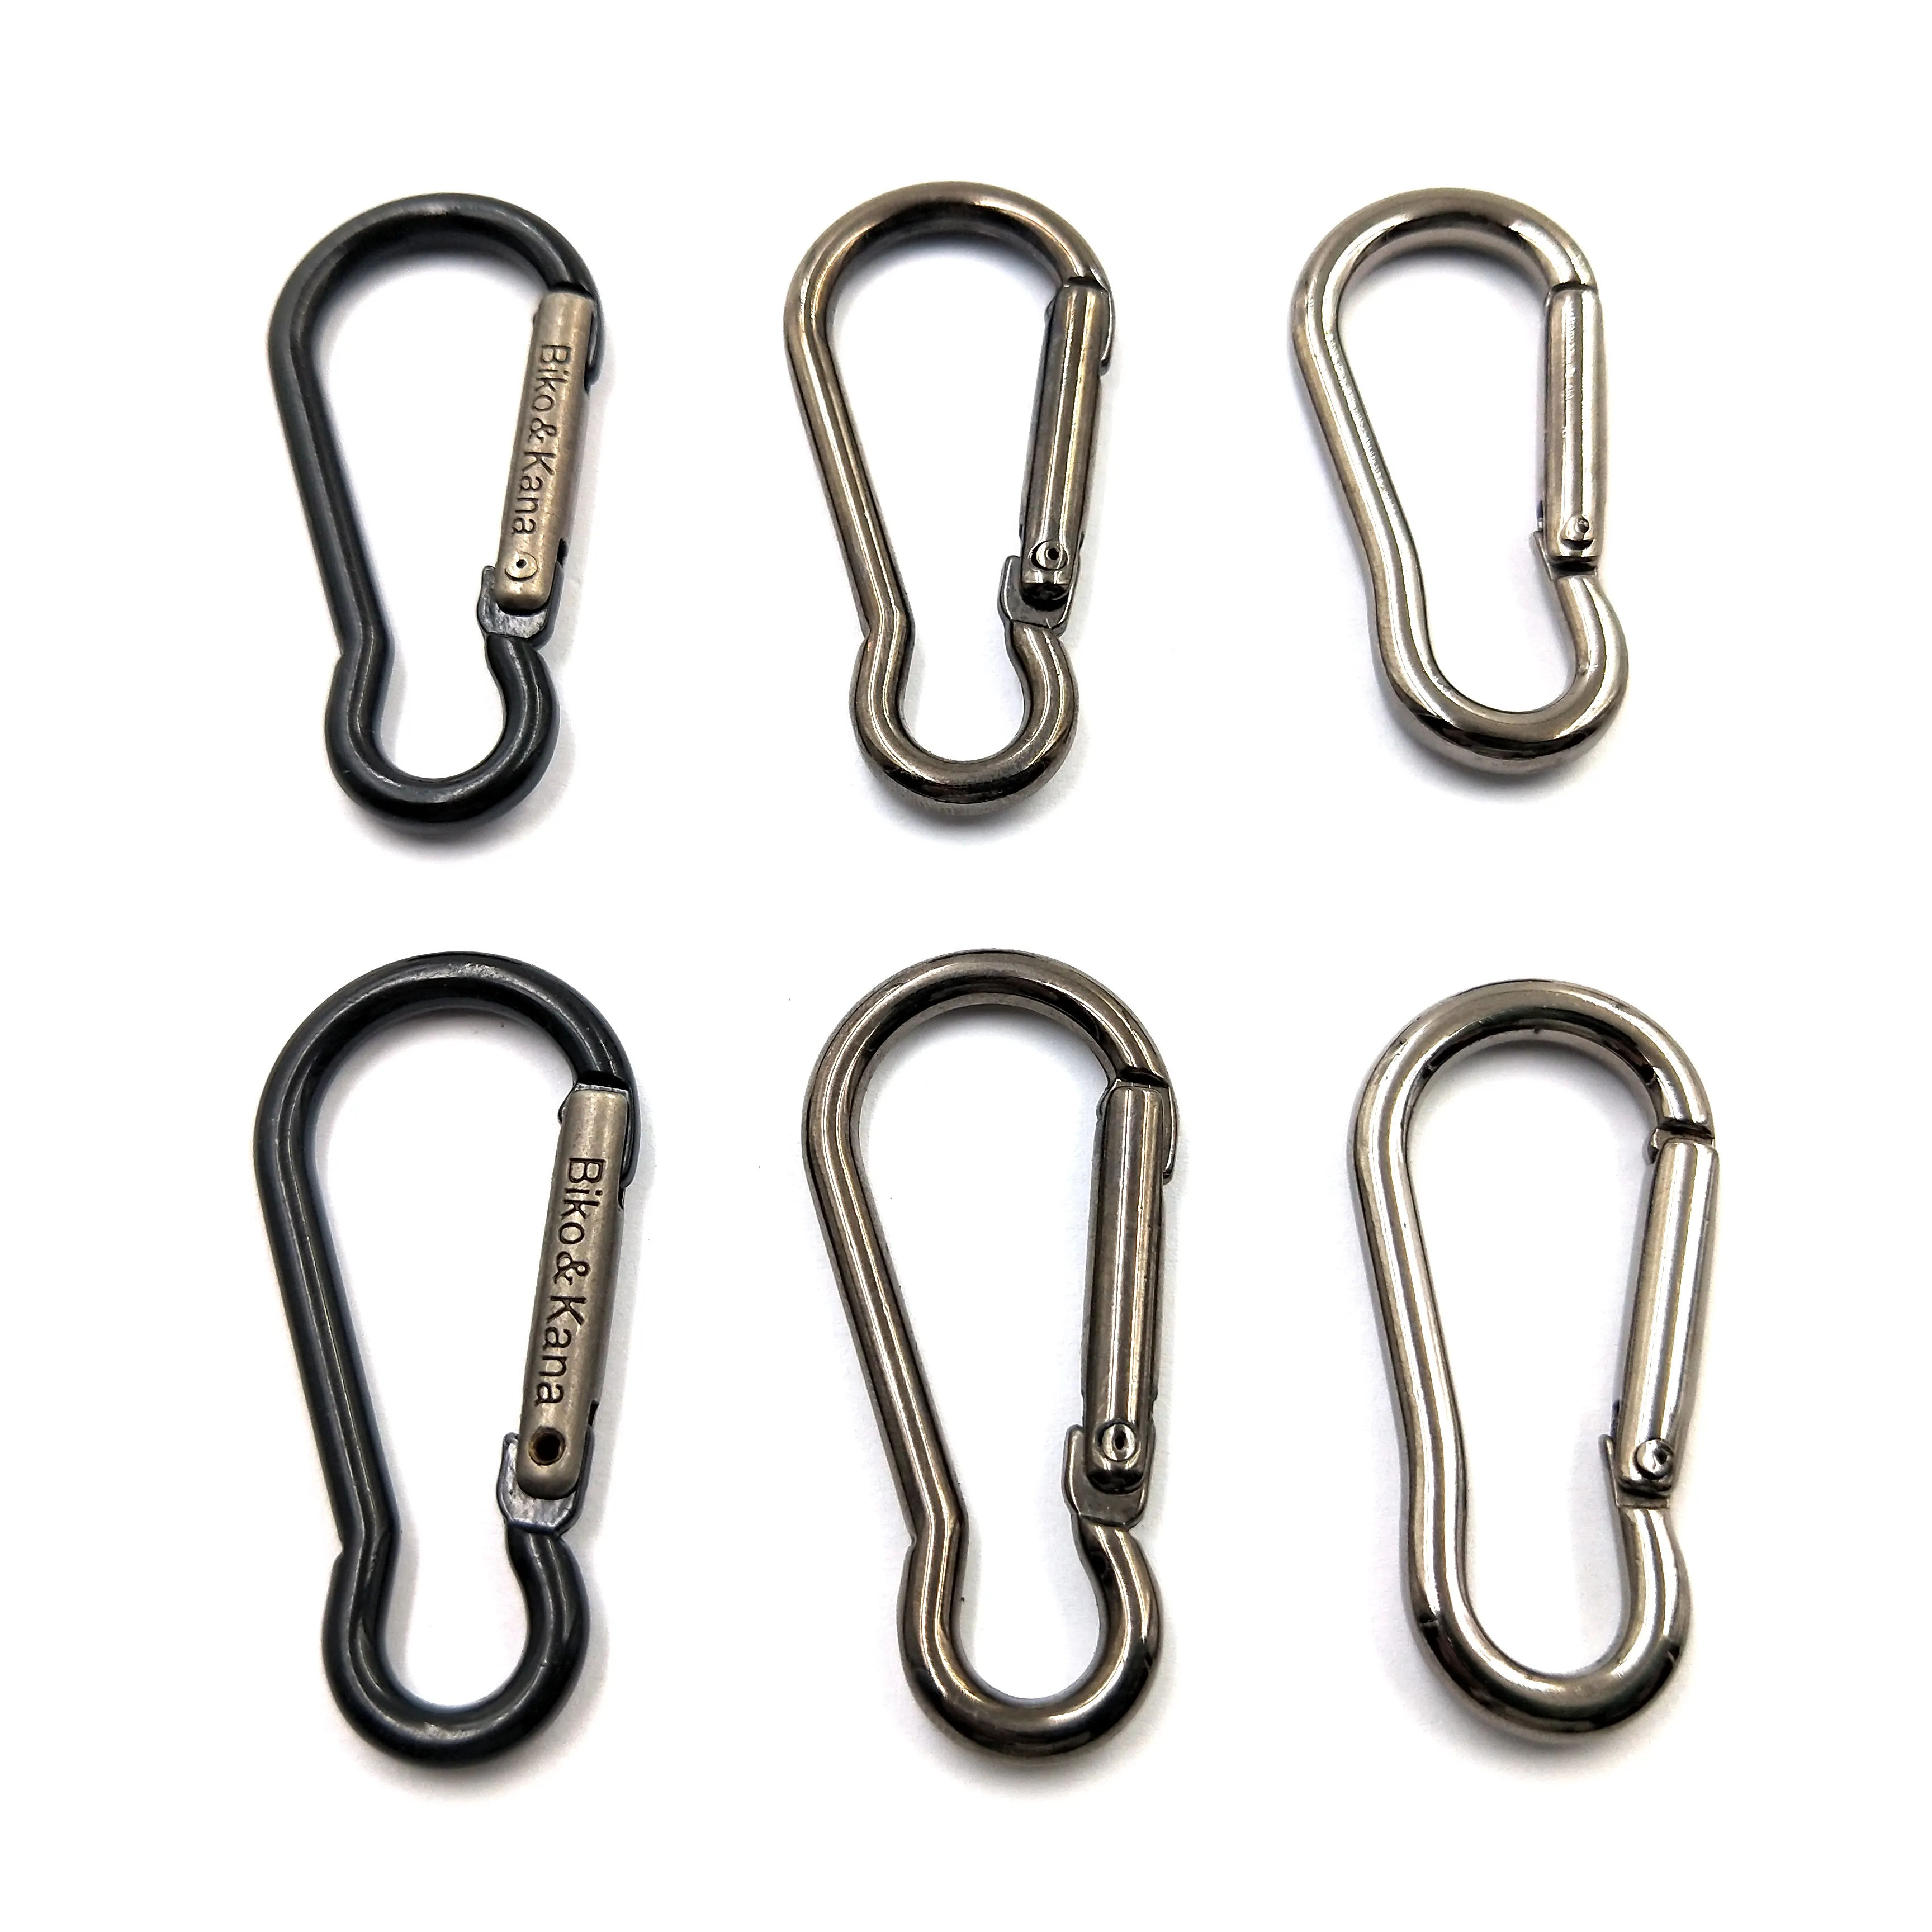 Hot Sale Metal Hooks Spring Snap Carabiner Hook for Keychains/Climbing